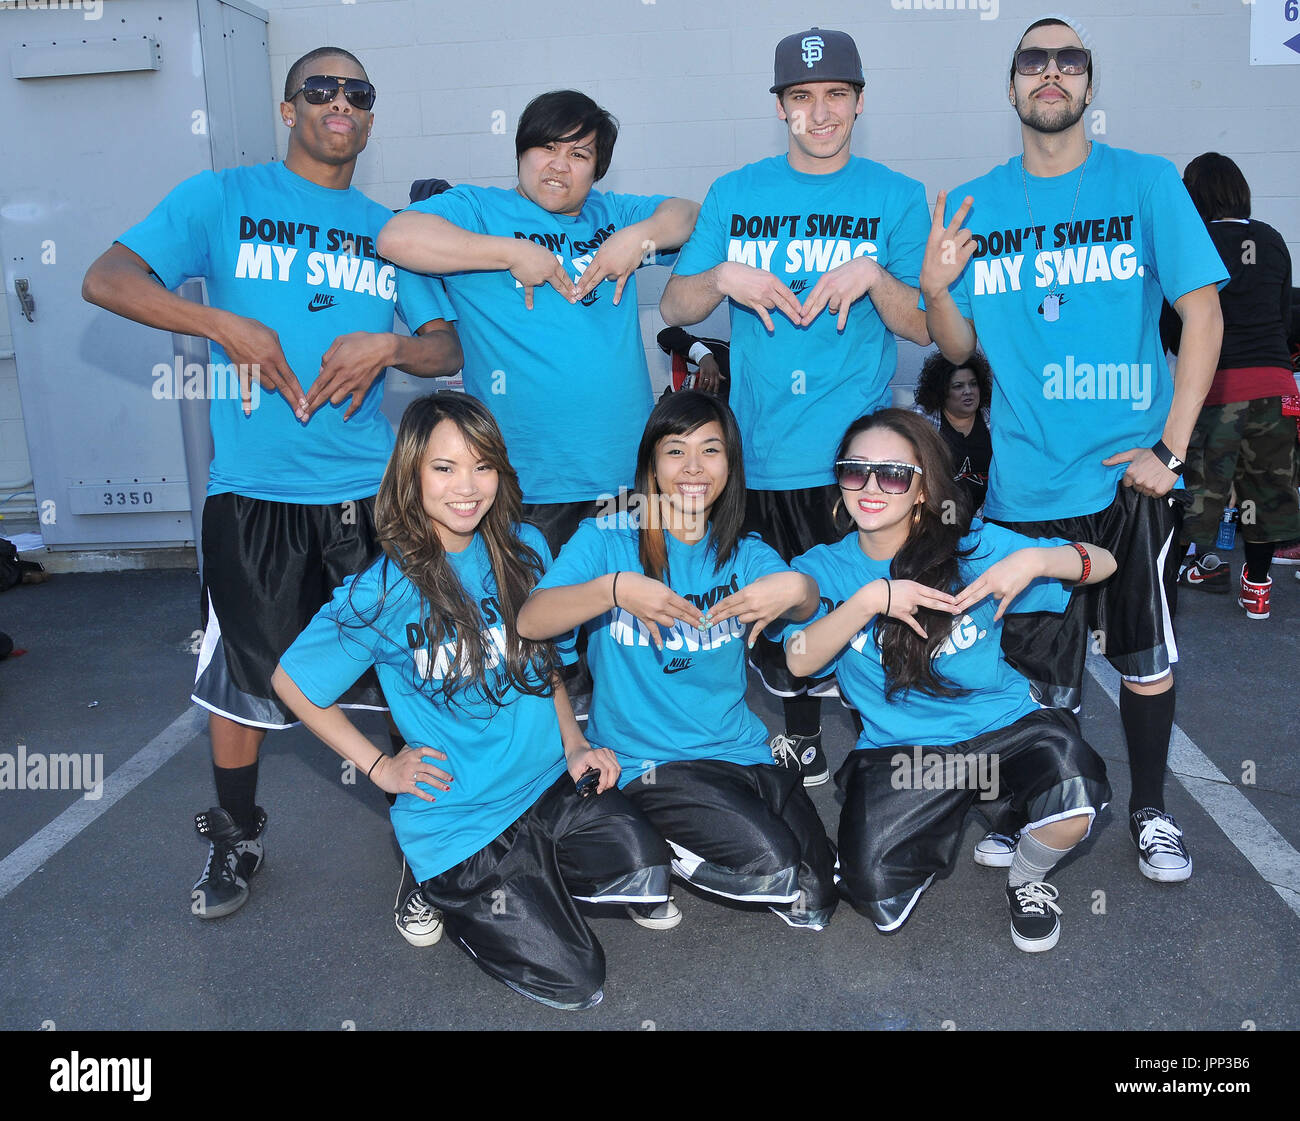 Misfit from Sacramento, CA at Randy Jackson's America's Best Dance Crew Season 7 Season Of The Superstars - Los Angeles Auditions at Center Staging in Burbank, CA. The event took place on Saturday, January 28, 2012. Photo by Sthanlee B. Mirador Pacific Rim Photo Press. Stock Photo